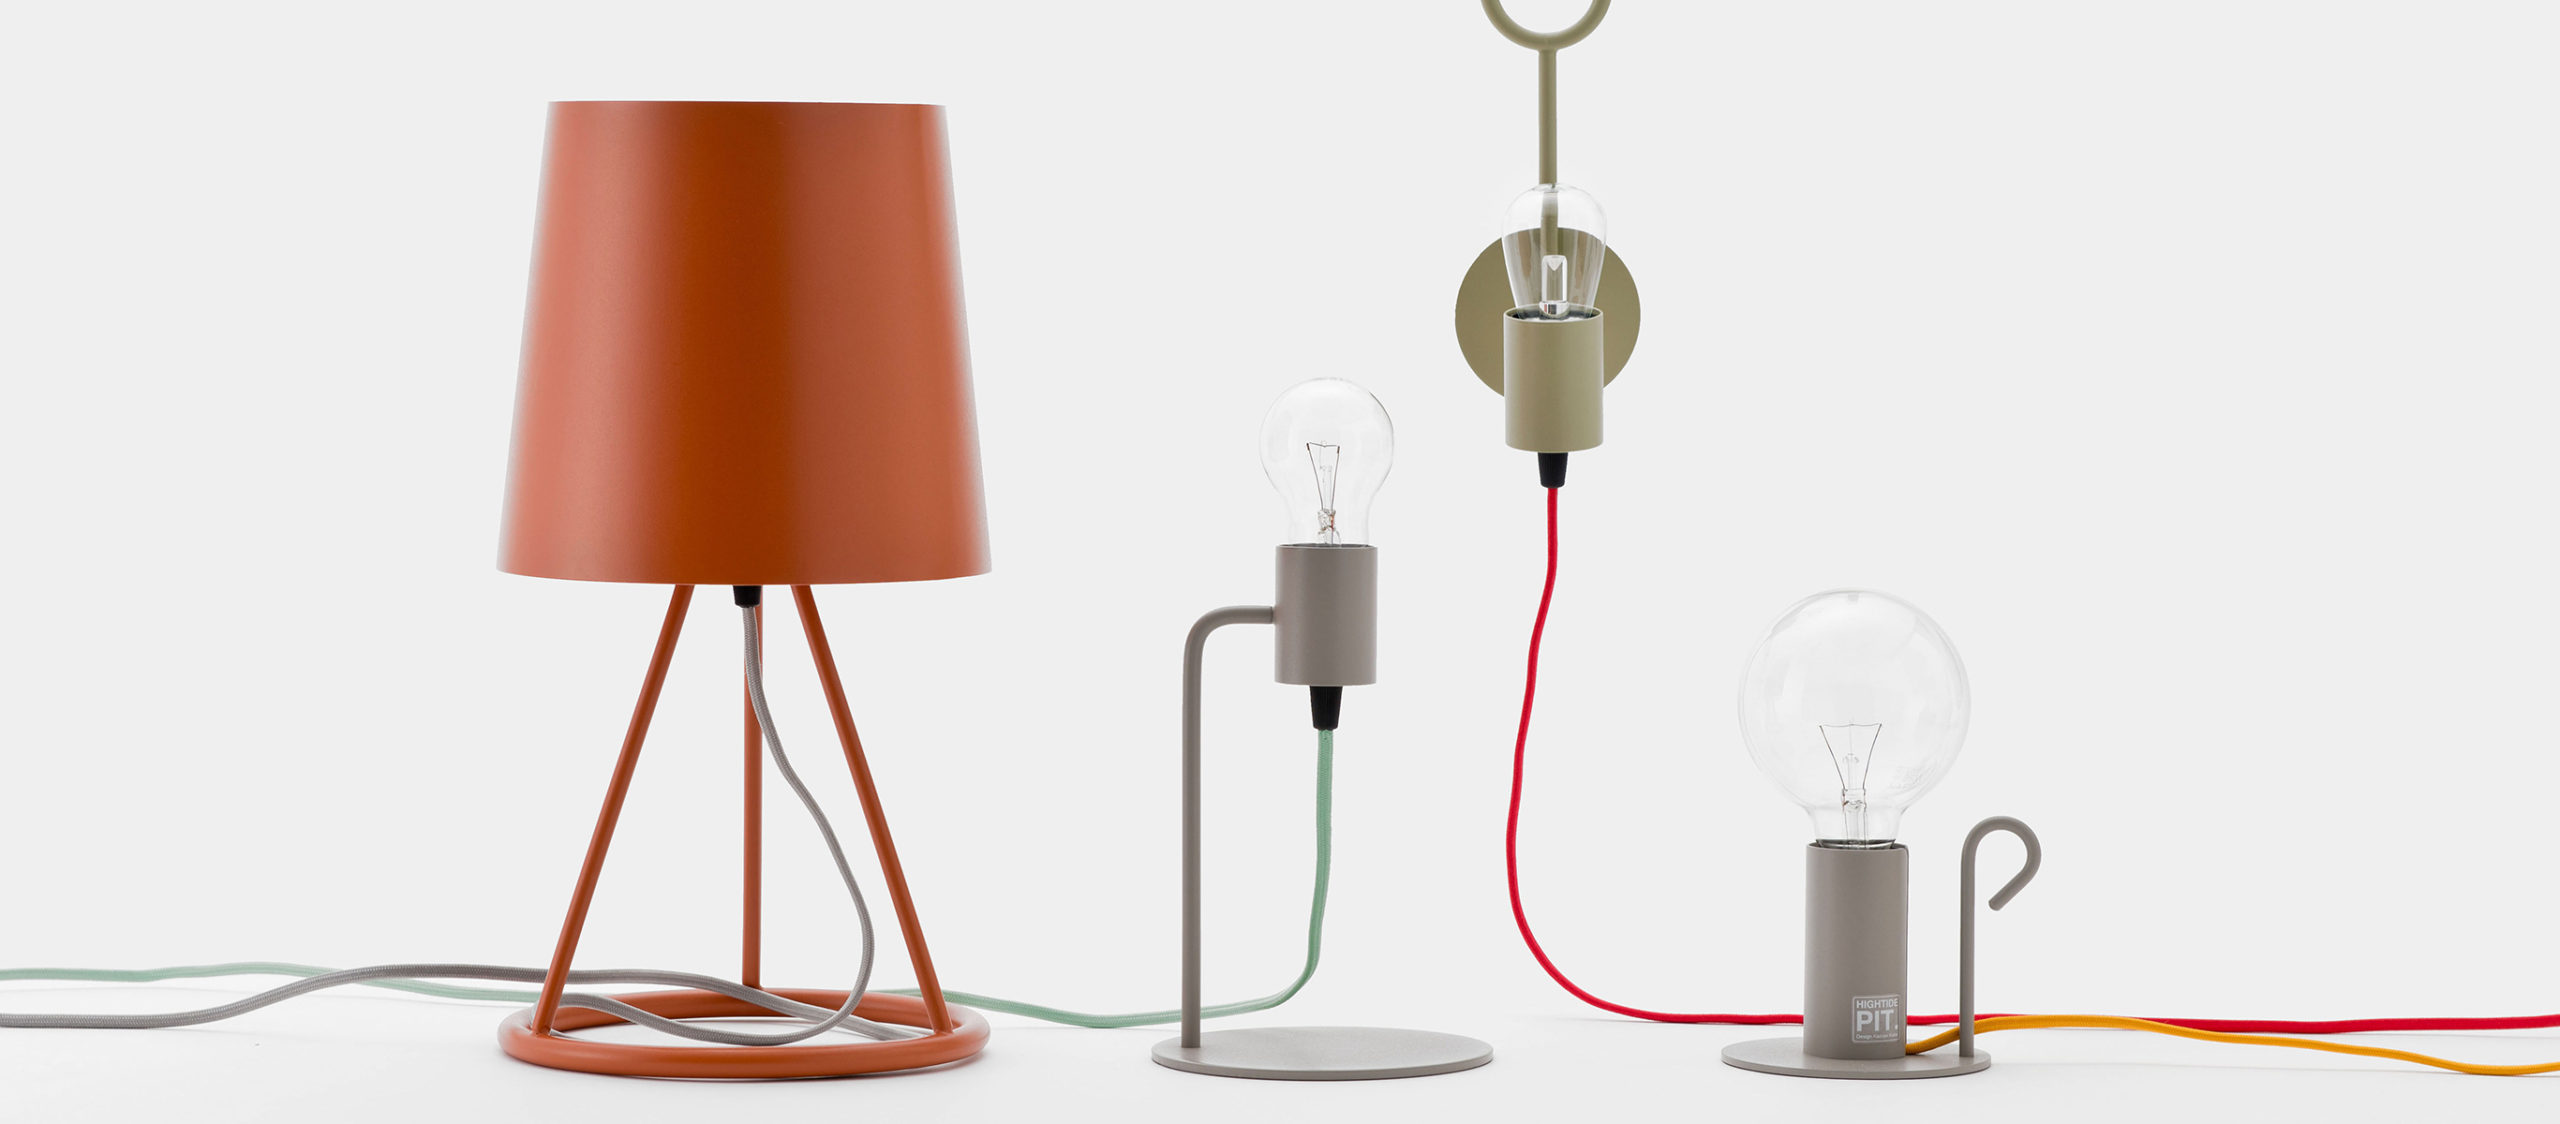 the lamp series capable ofselecting cable colours “Pit.”